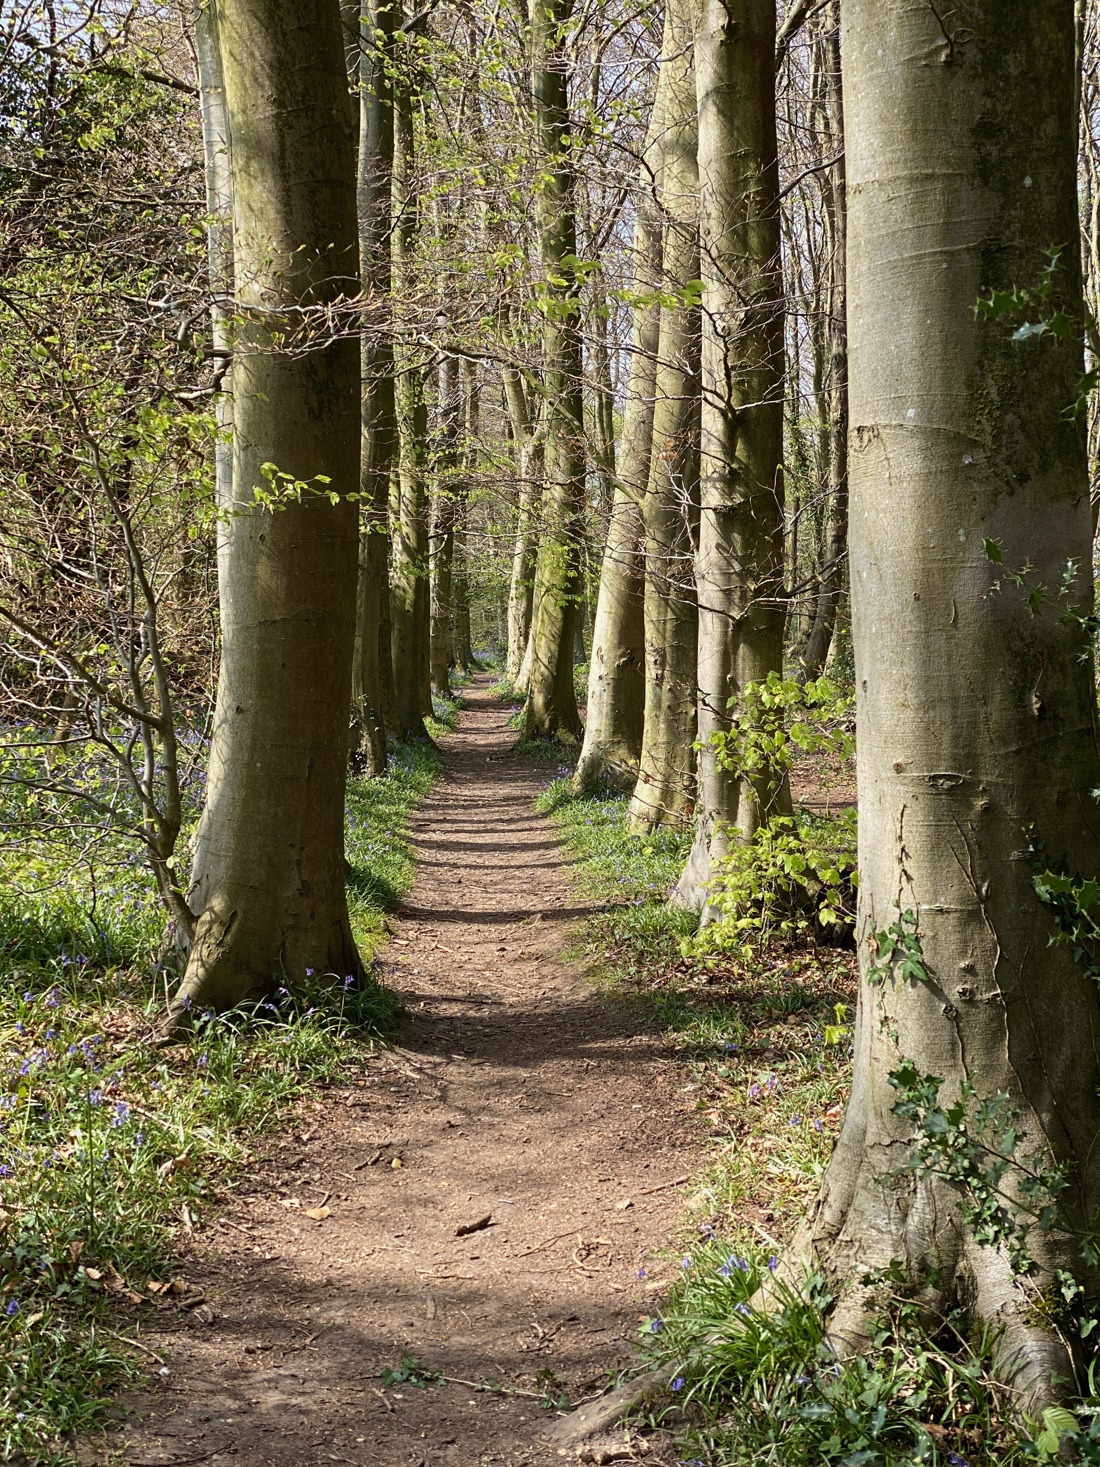 Path with trees lining each side